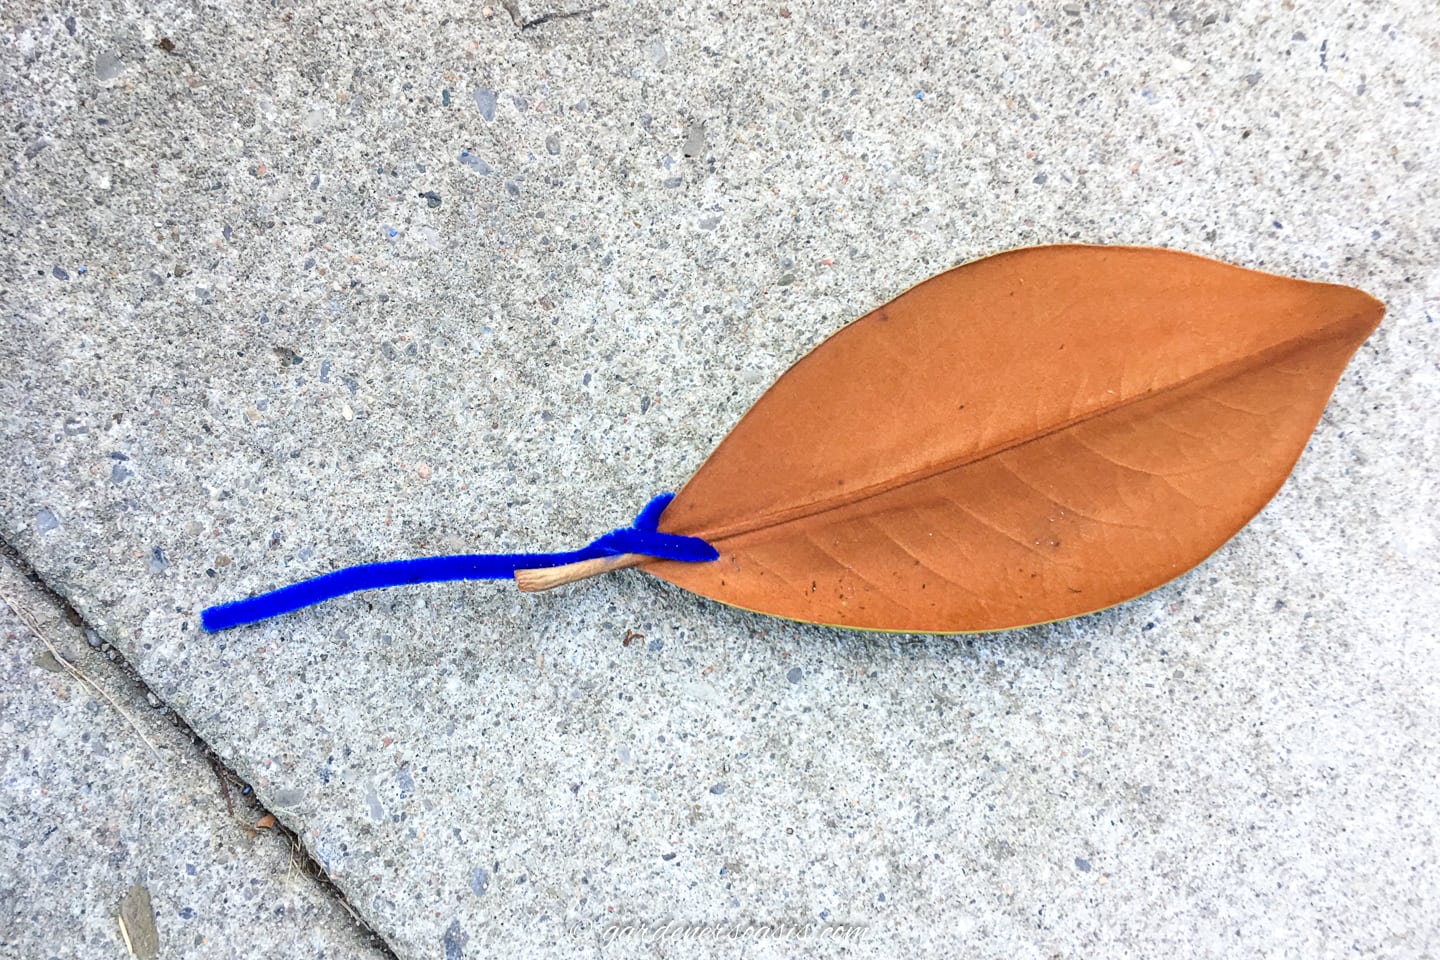 Magnolia leaf made into a pick with a pipe cleaner